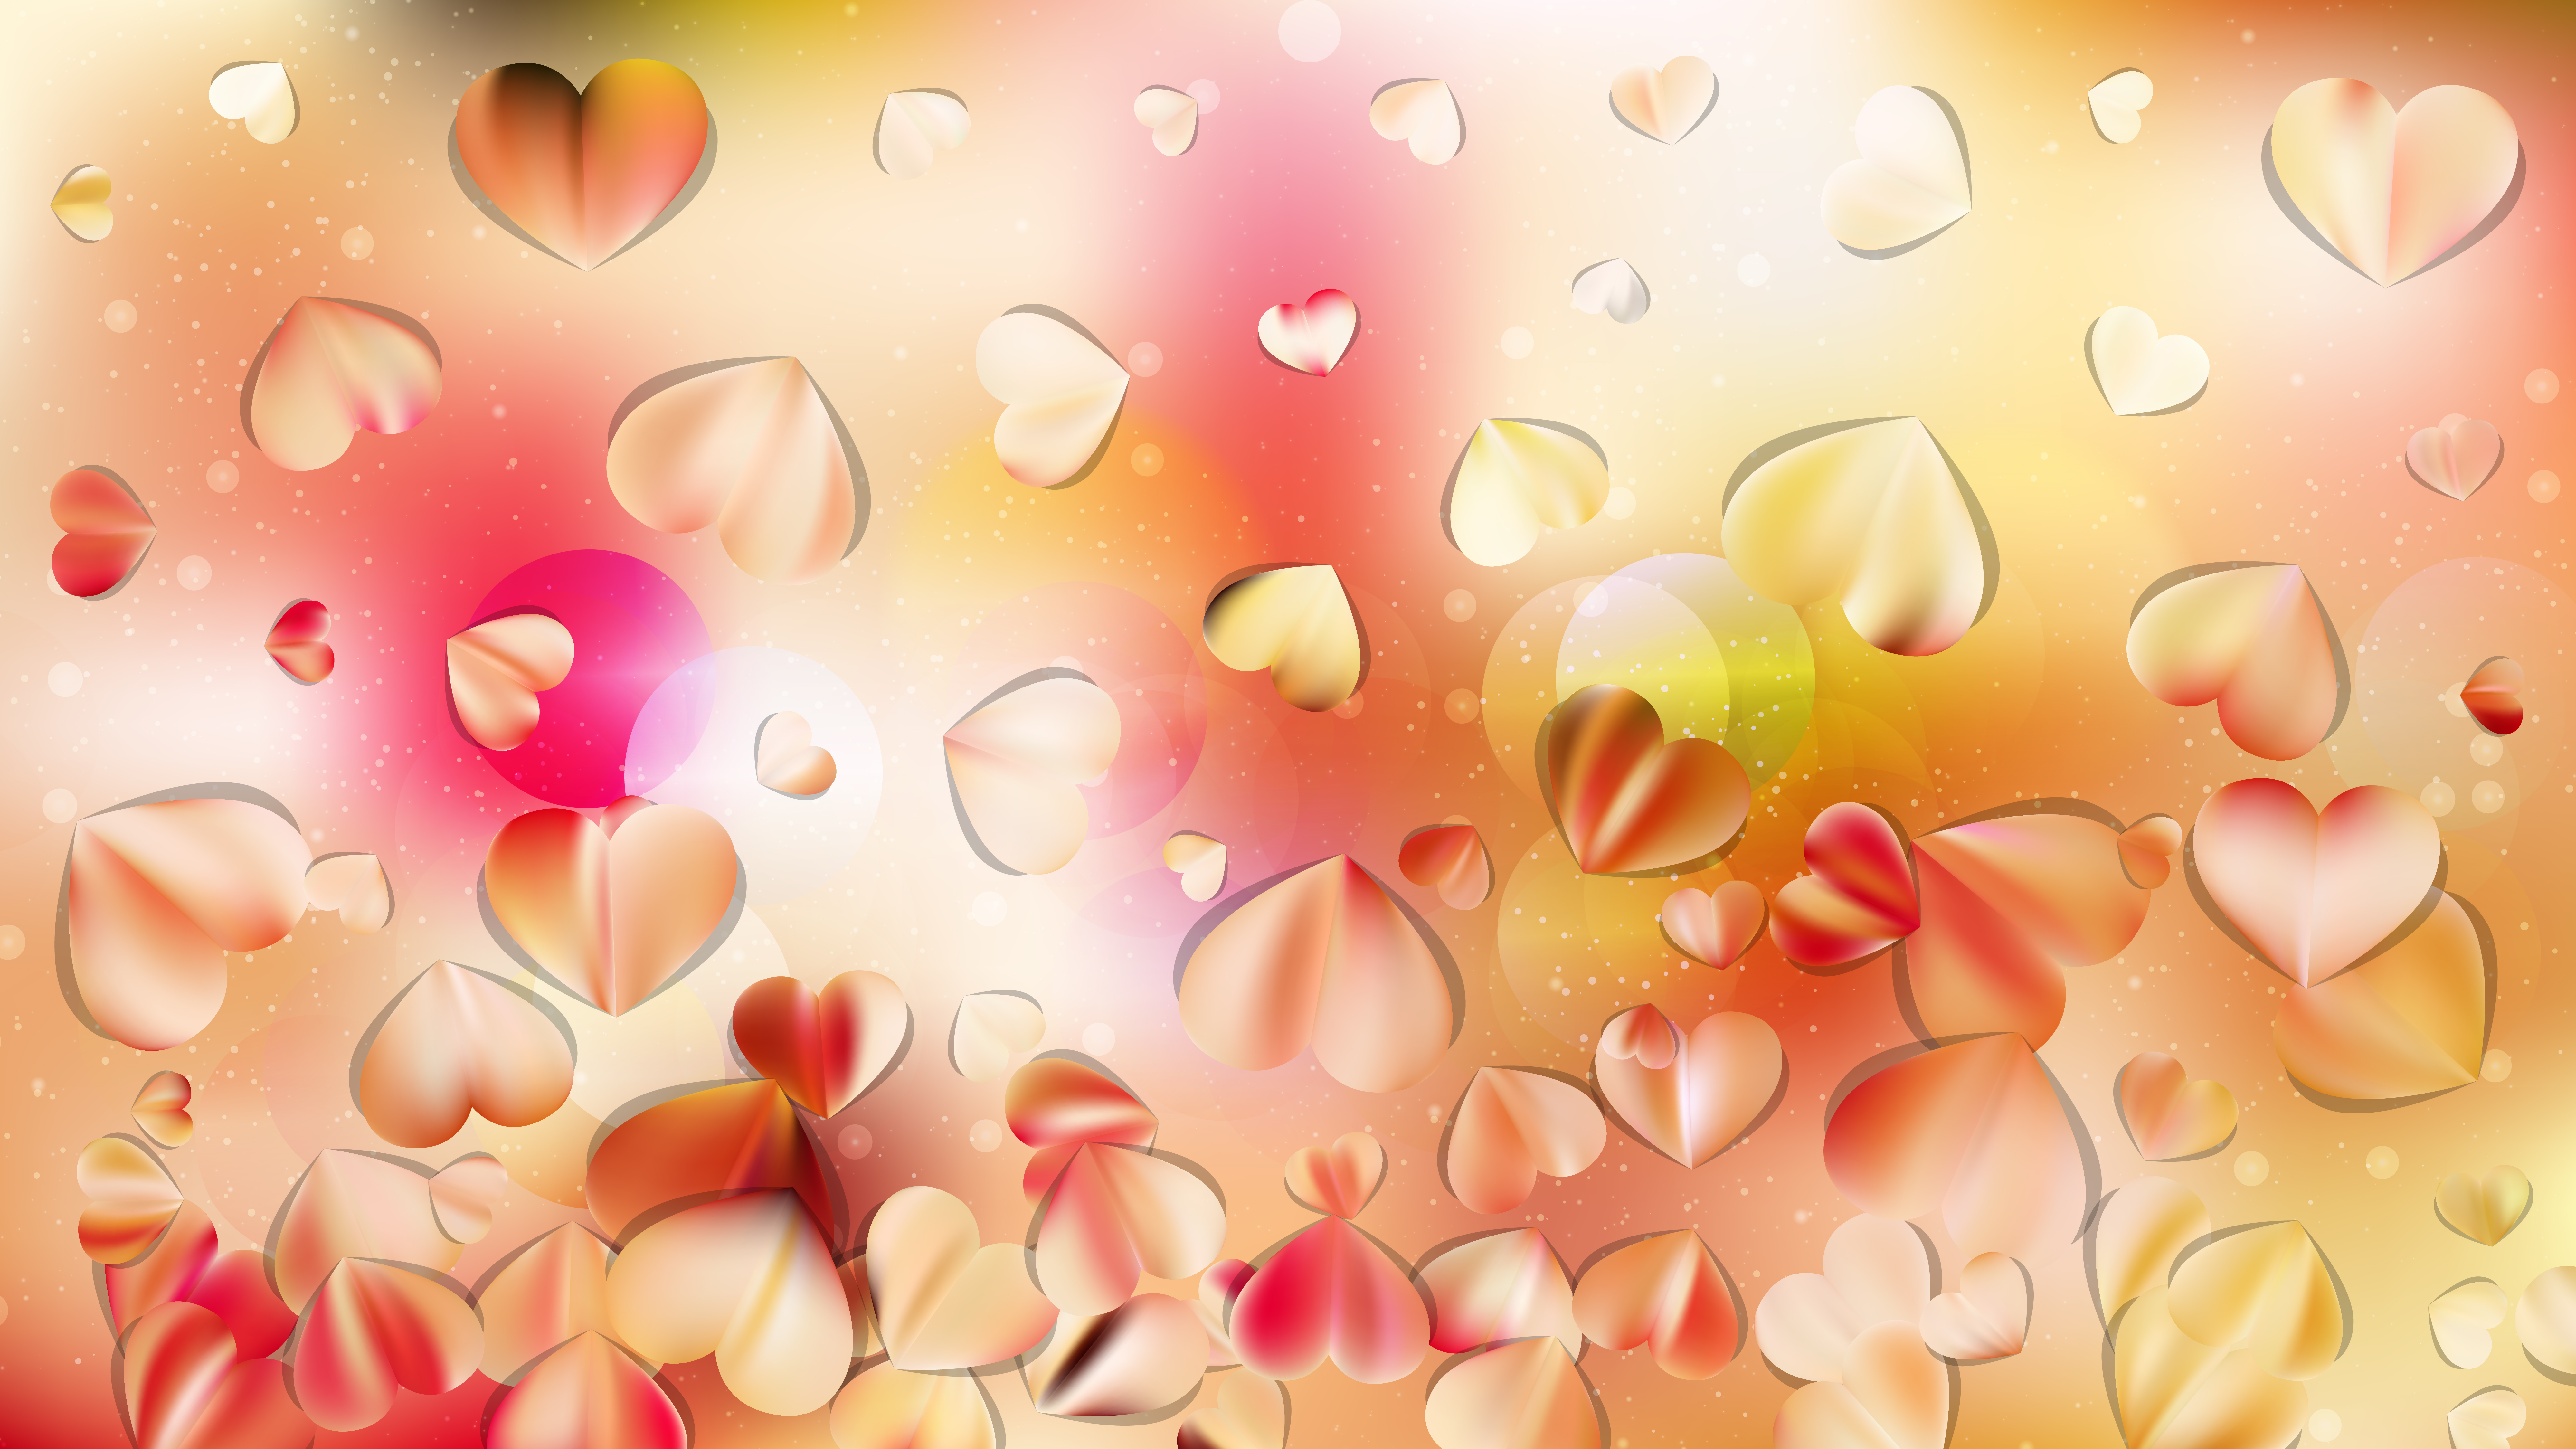 Pink And Yellow Heart Wallpaper Background Vector Art - Light Pink And Yellow Hearts Background - HD Wallpaper 